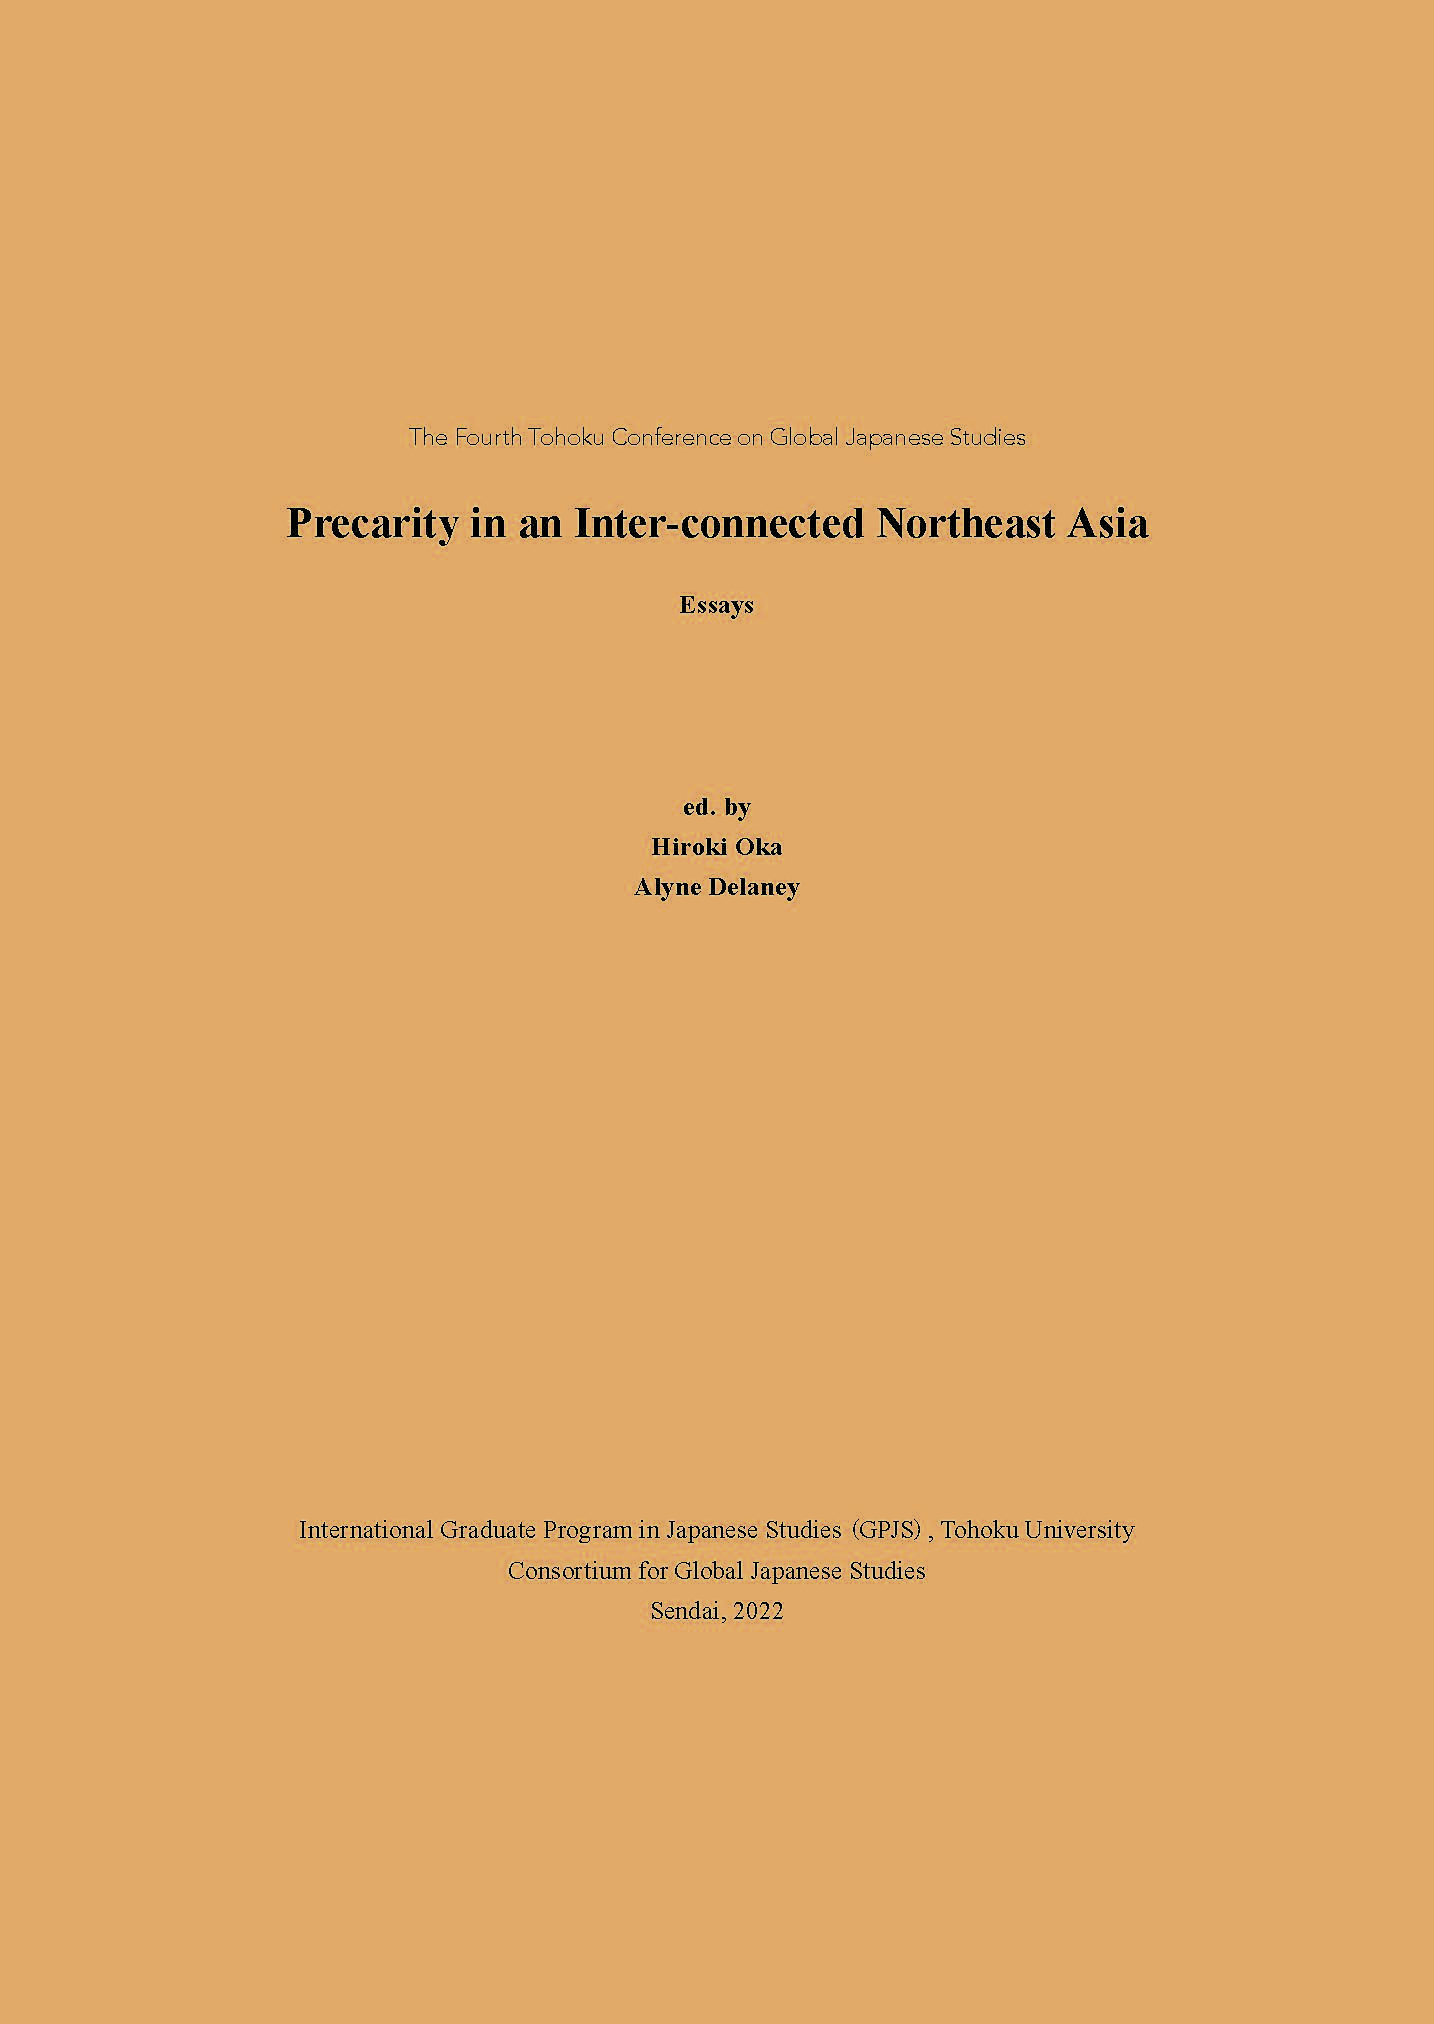 Precarity in an Inter-connected Northeast Asia